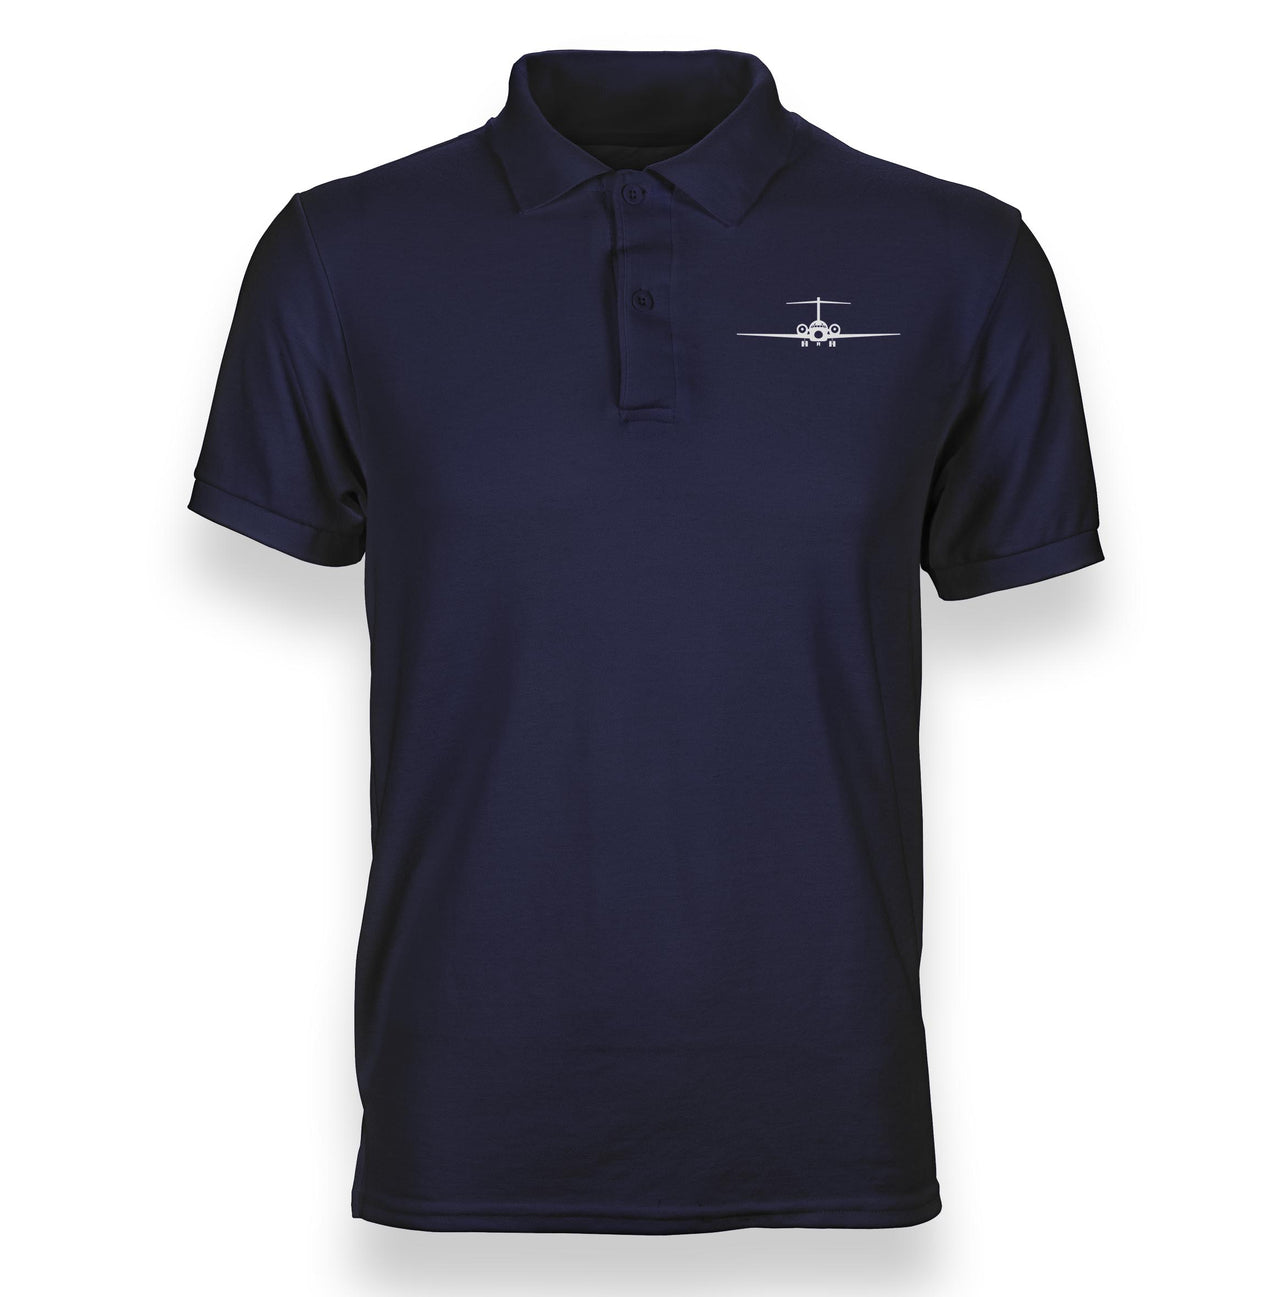 Boeing 717 Silhouette Designed Polo T-Shirts